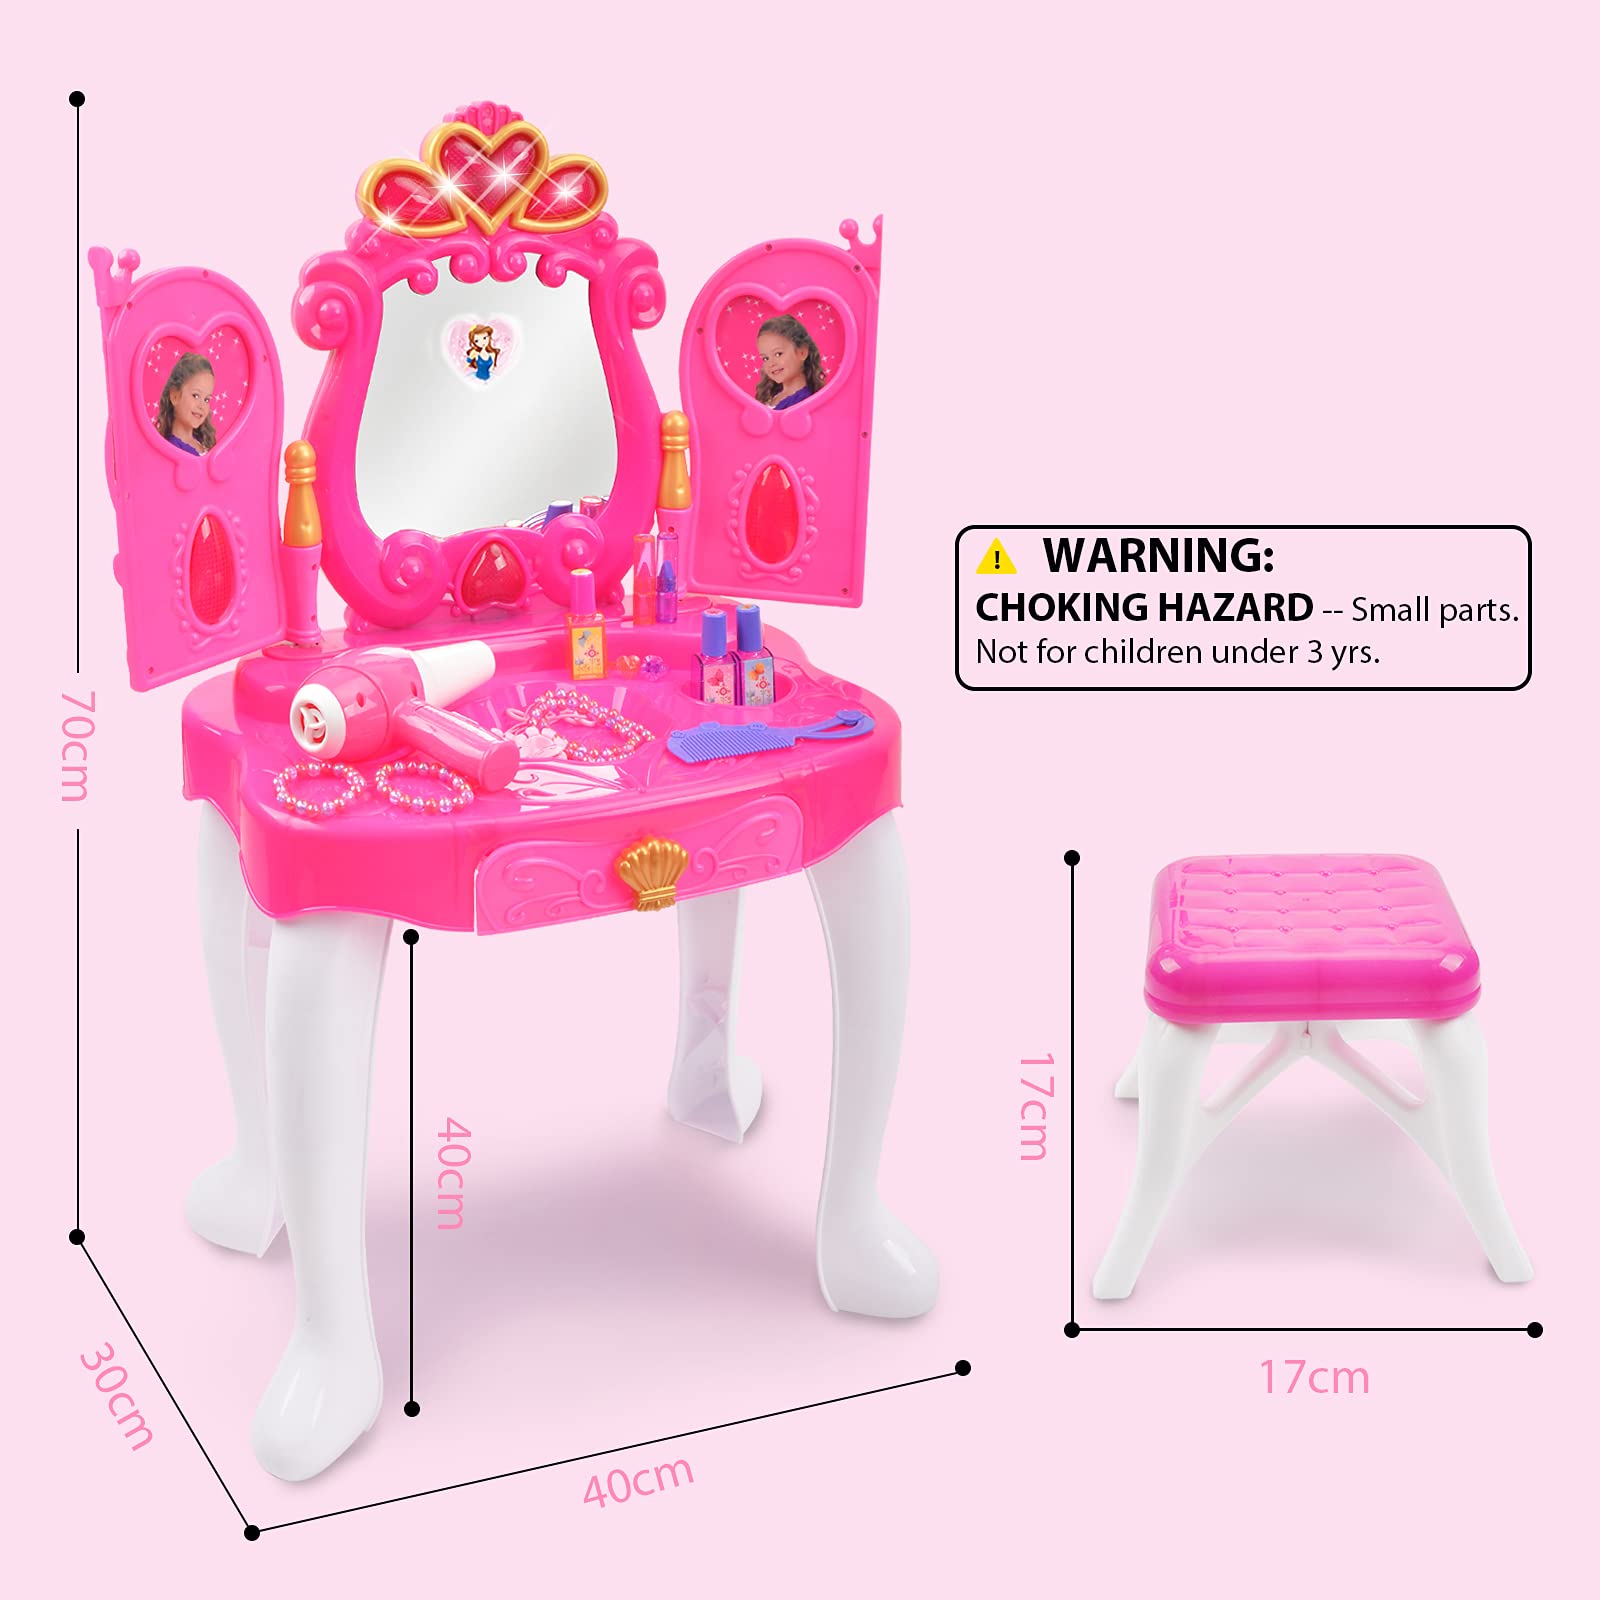 Ylovetoys Kids Vanity Makeup Table for Little Girl, Toddler Princess Vanity Play Toy Set with Mirror and Stool, Lights, Music Sound, Beauty Fantasy Dress Up Set, Gift for Little Girls 3-5 Years Old